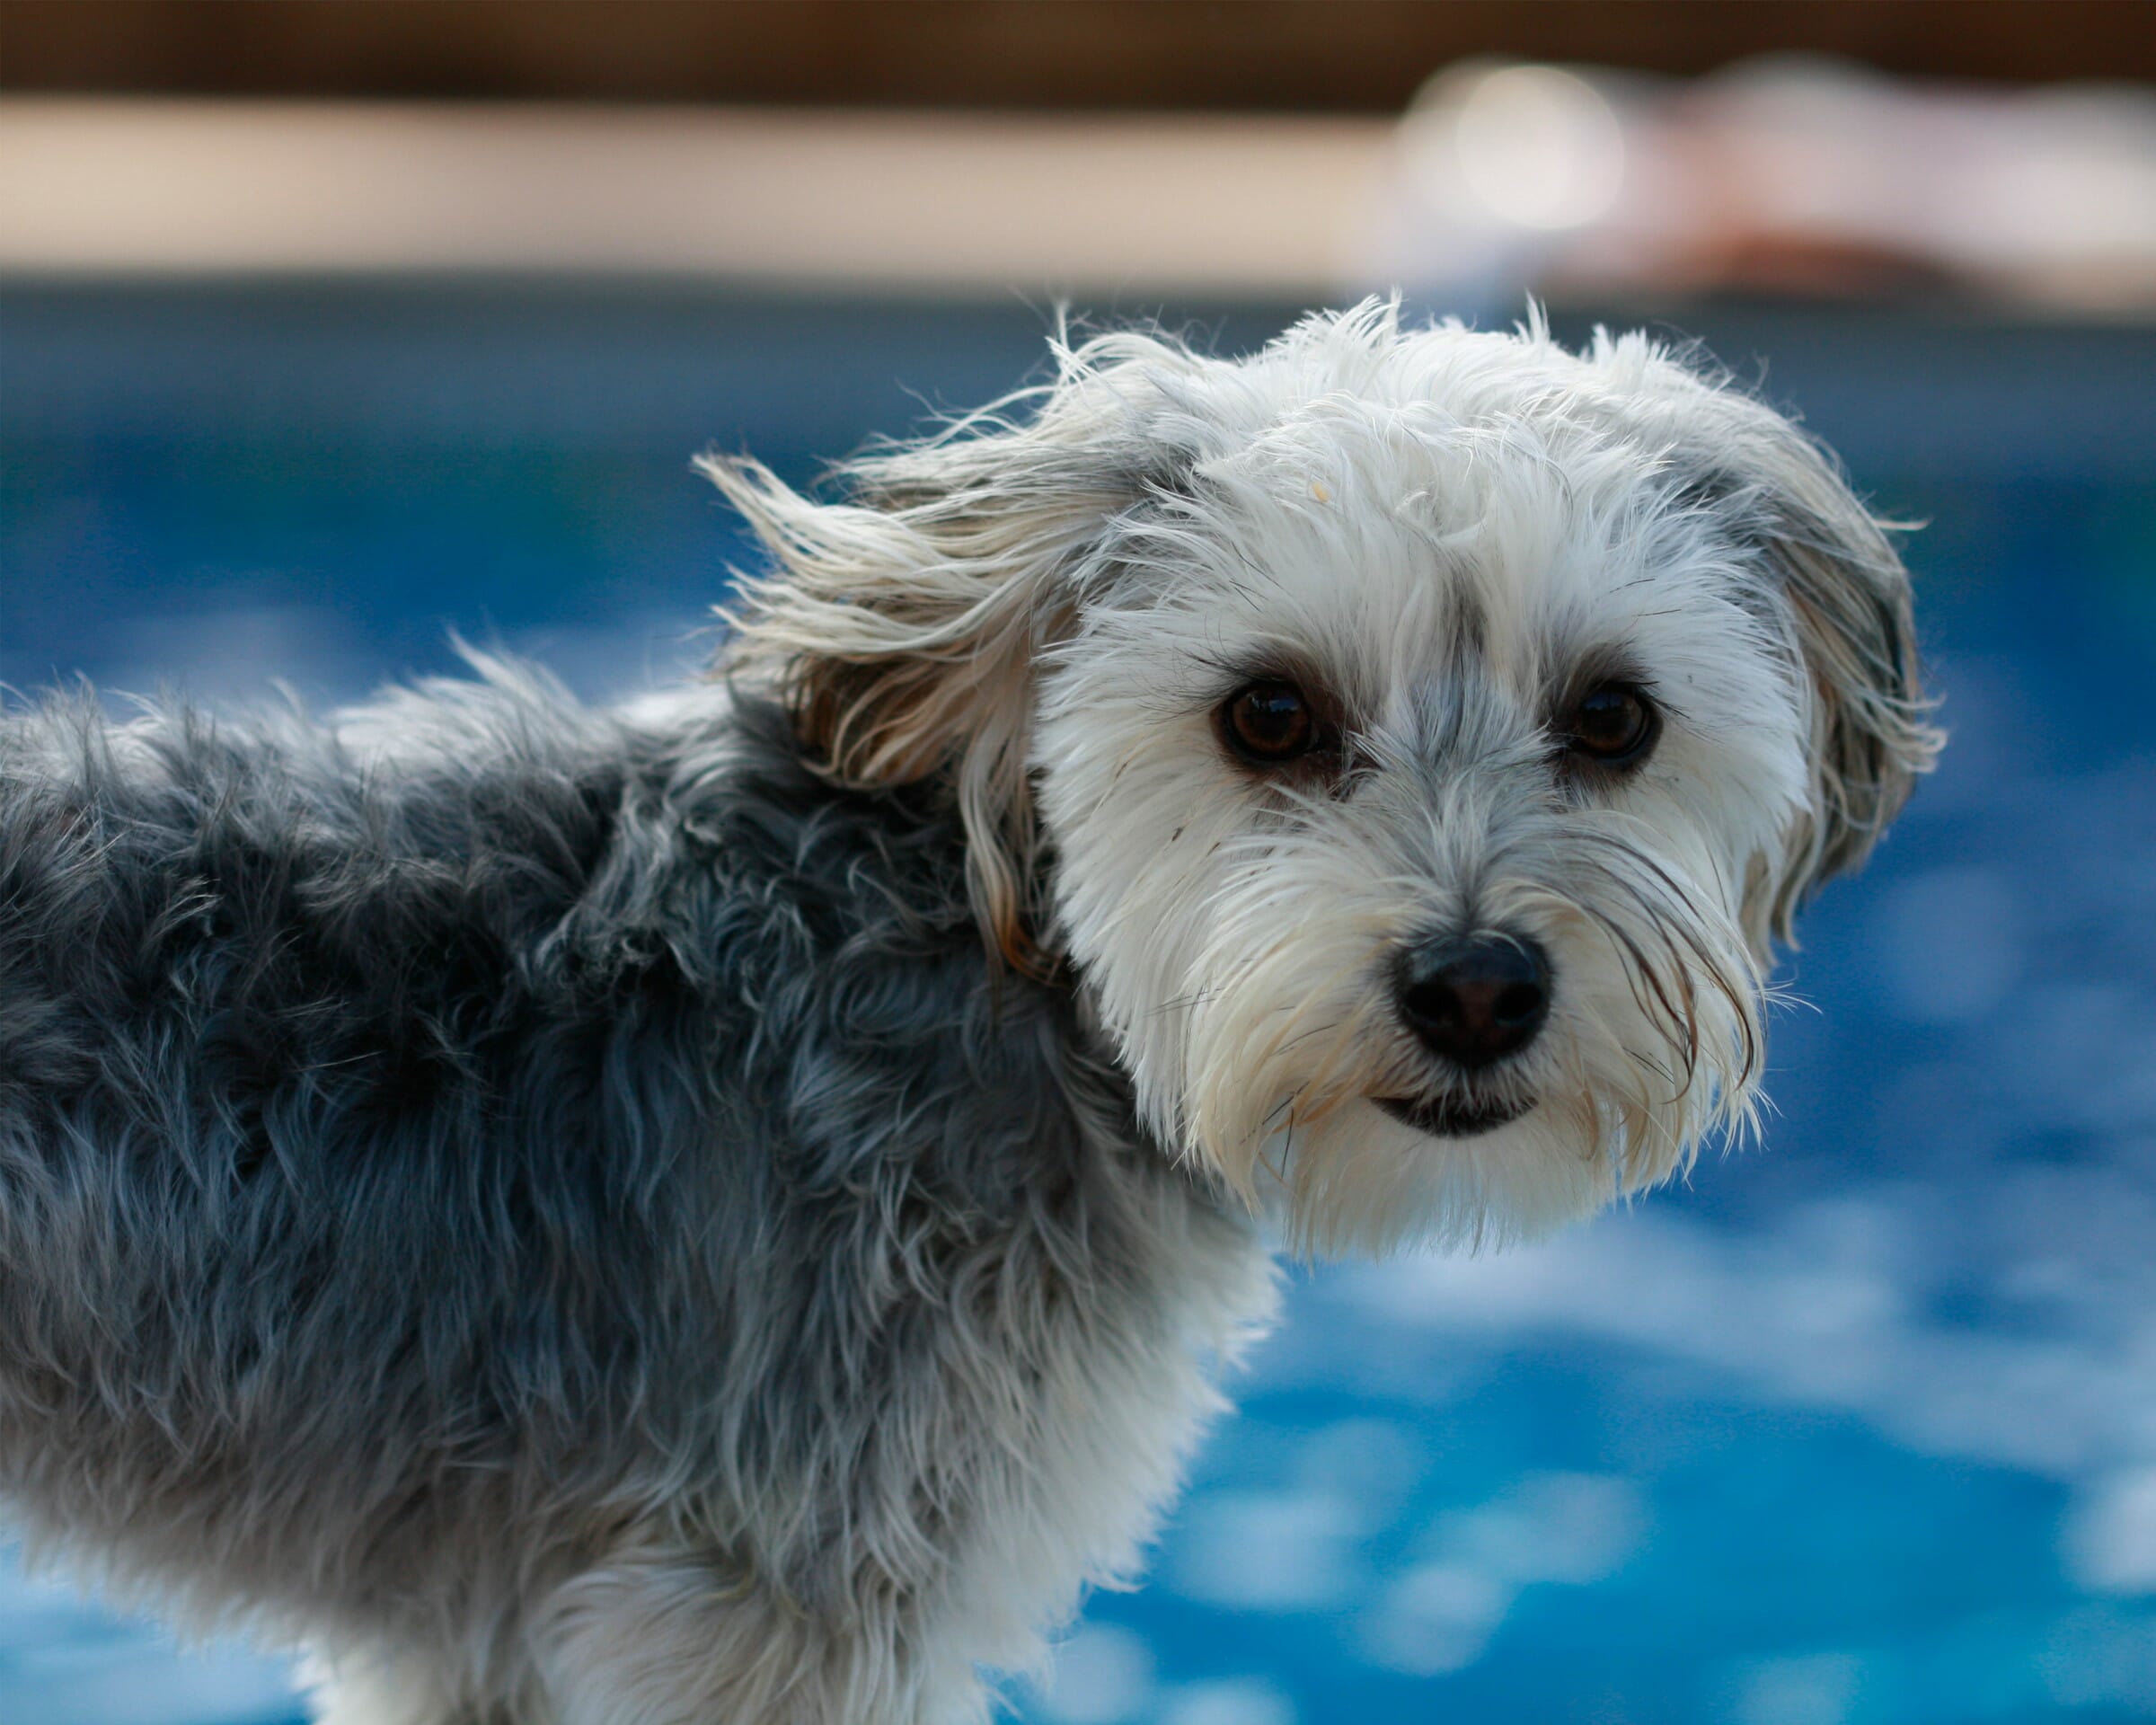 Yorkie Poo vs Morkie: Similarities and Differences